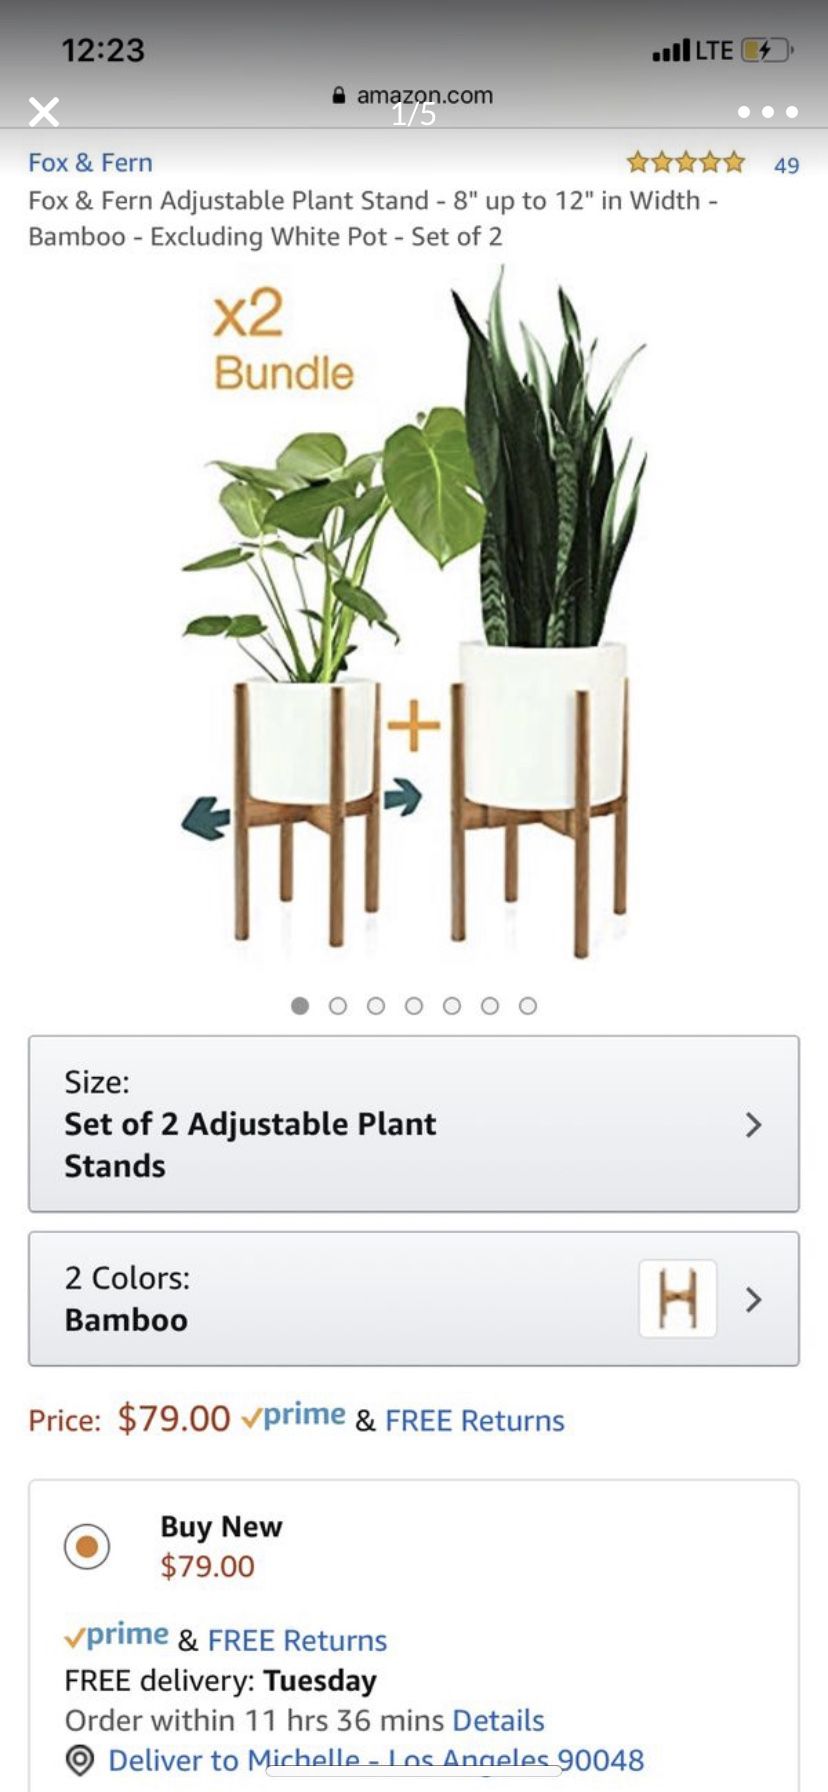 Fox & Fern Adjustable Plant Stand - 8" up to 12" in Width - Bamboo - Excluding White Pot - Set of 2